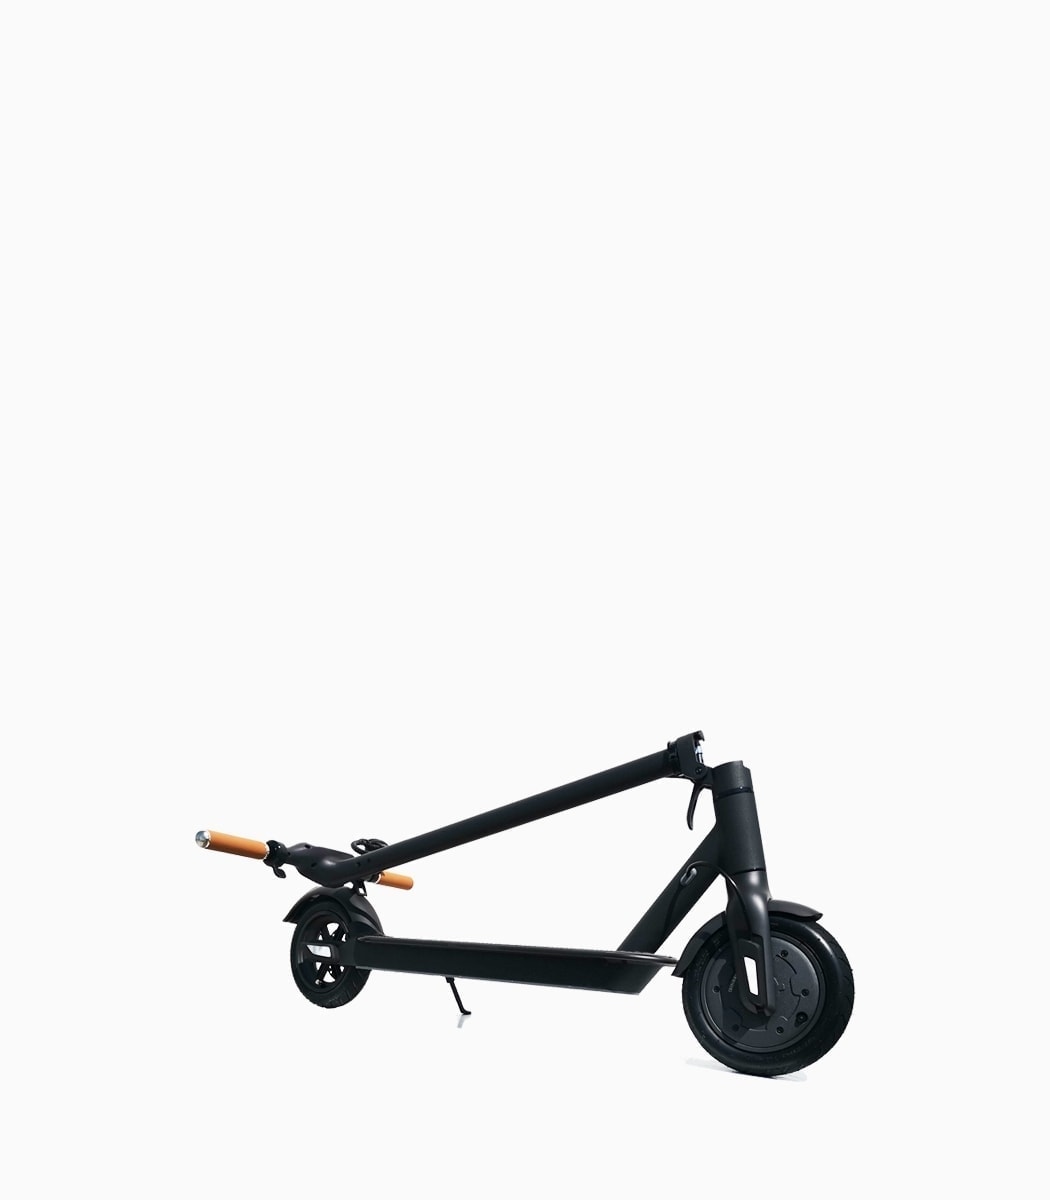 MOBOT L1-1 (BLACK7.5AH) UL2272 certified e-scooter folded angled right